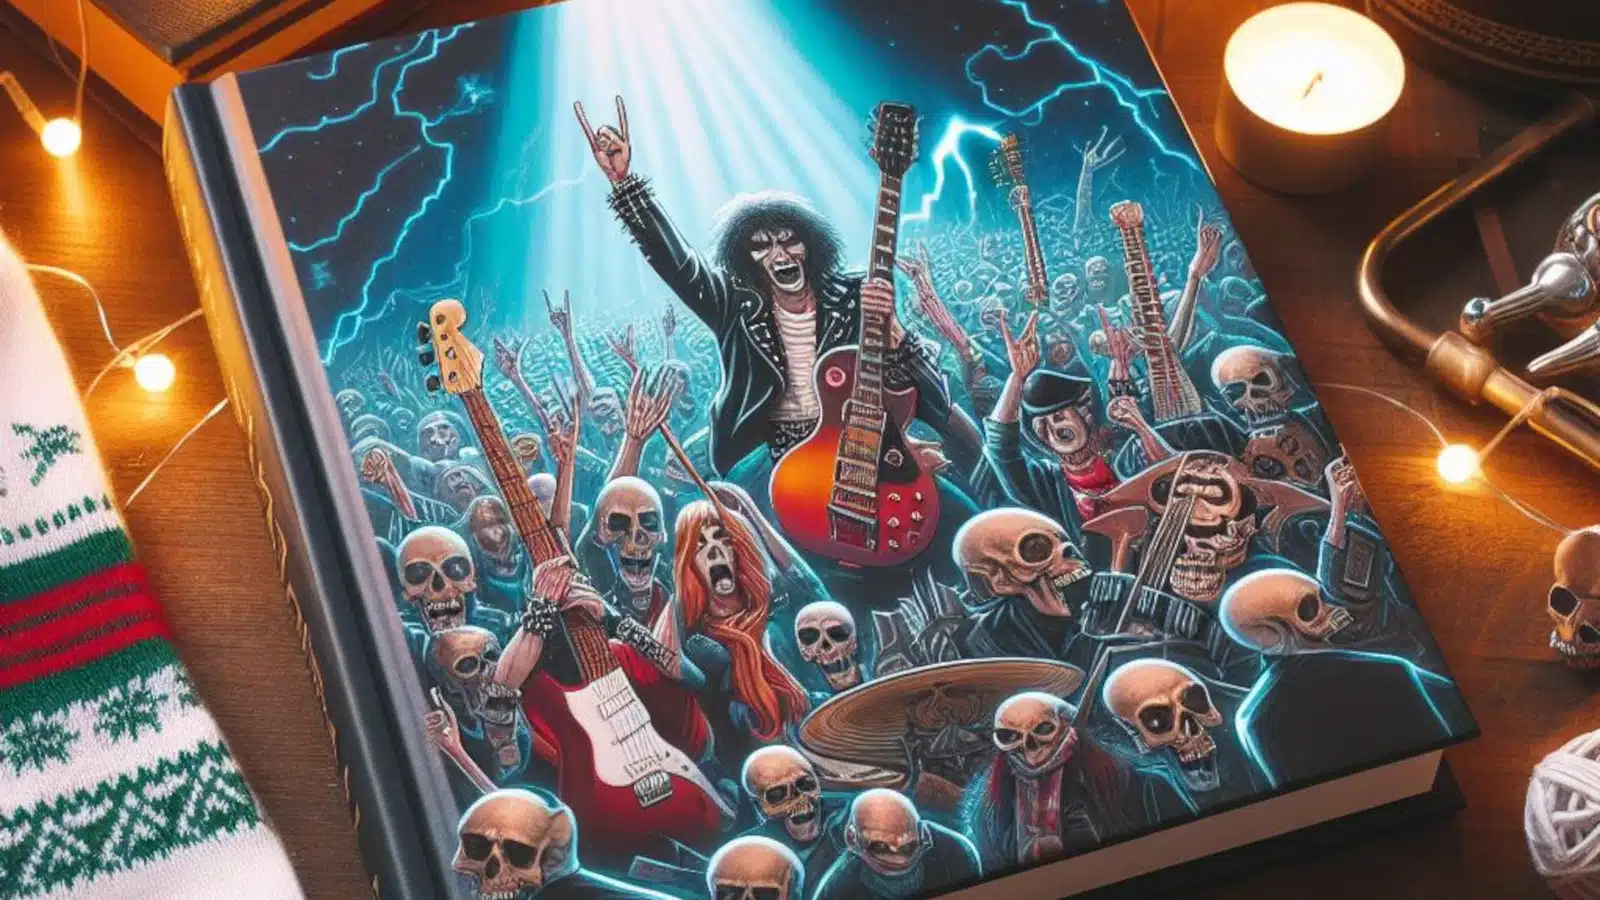 Books for Rock Fans This Christmas